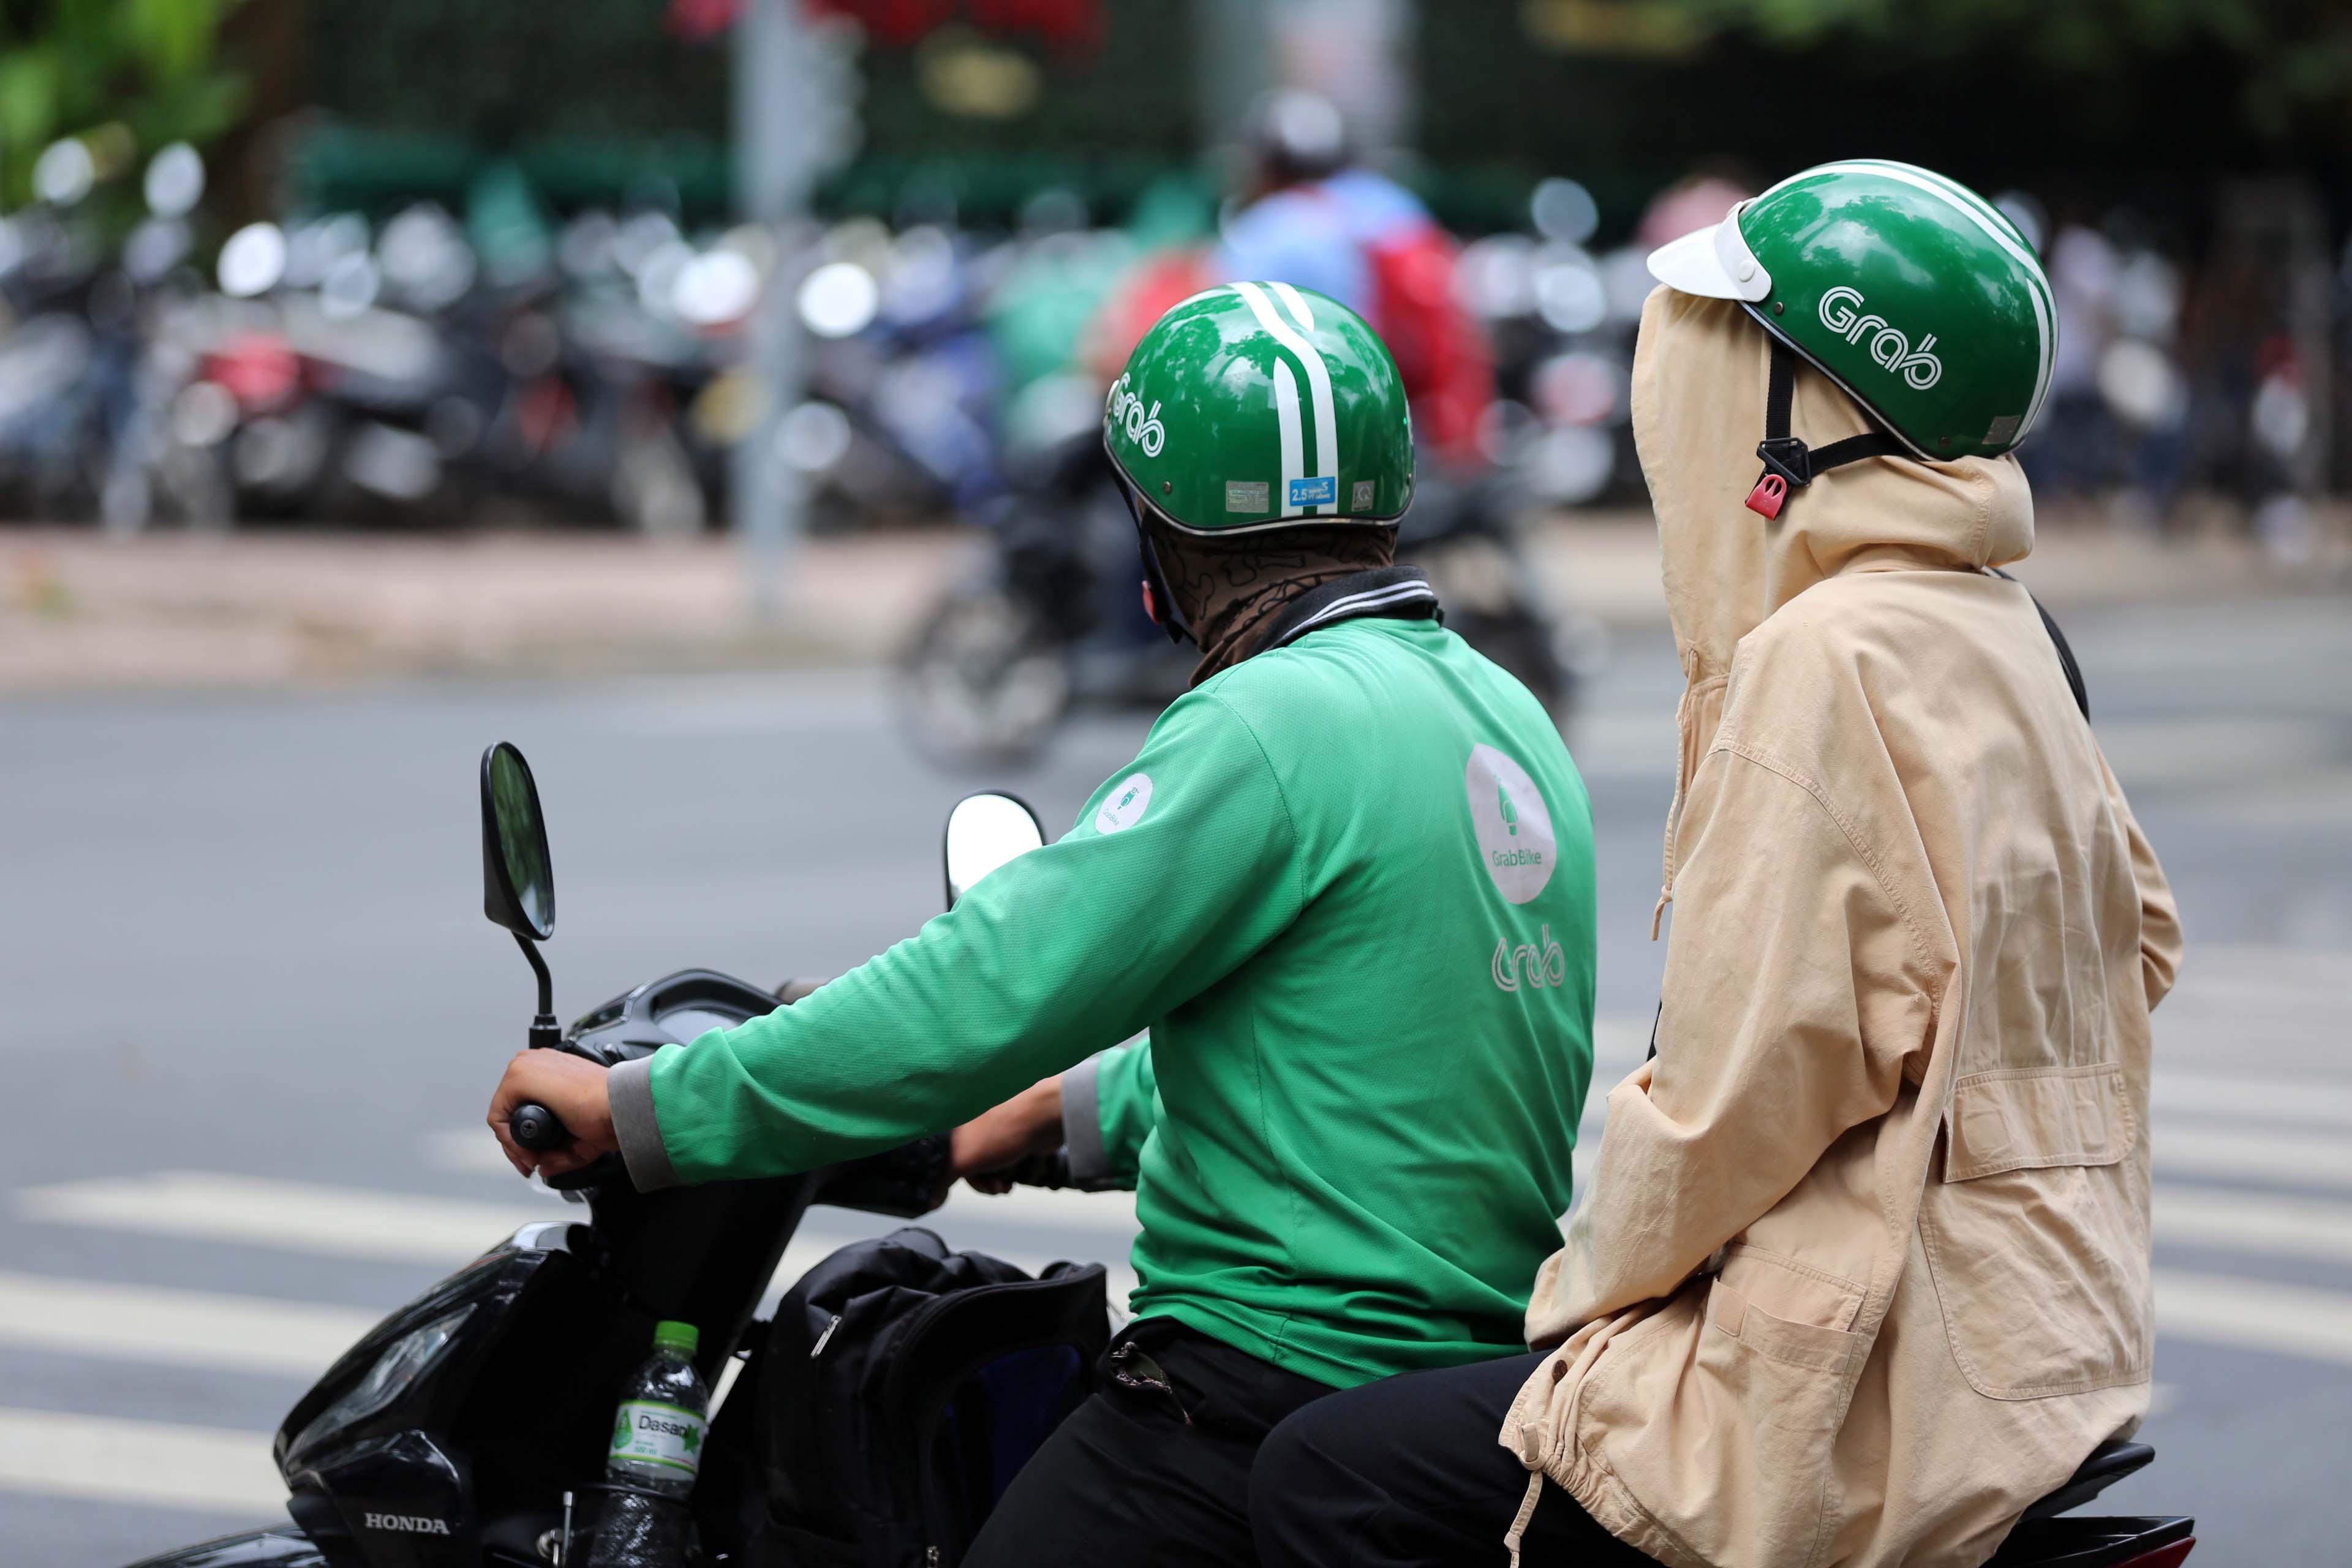 Technology motorbike taxis are allowed to operate in Ho Chi Minh City